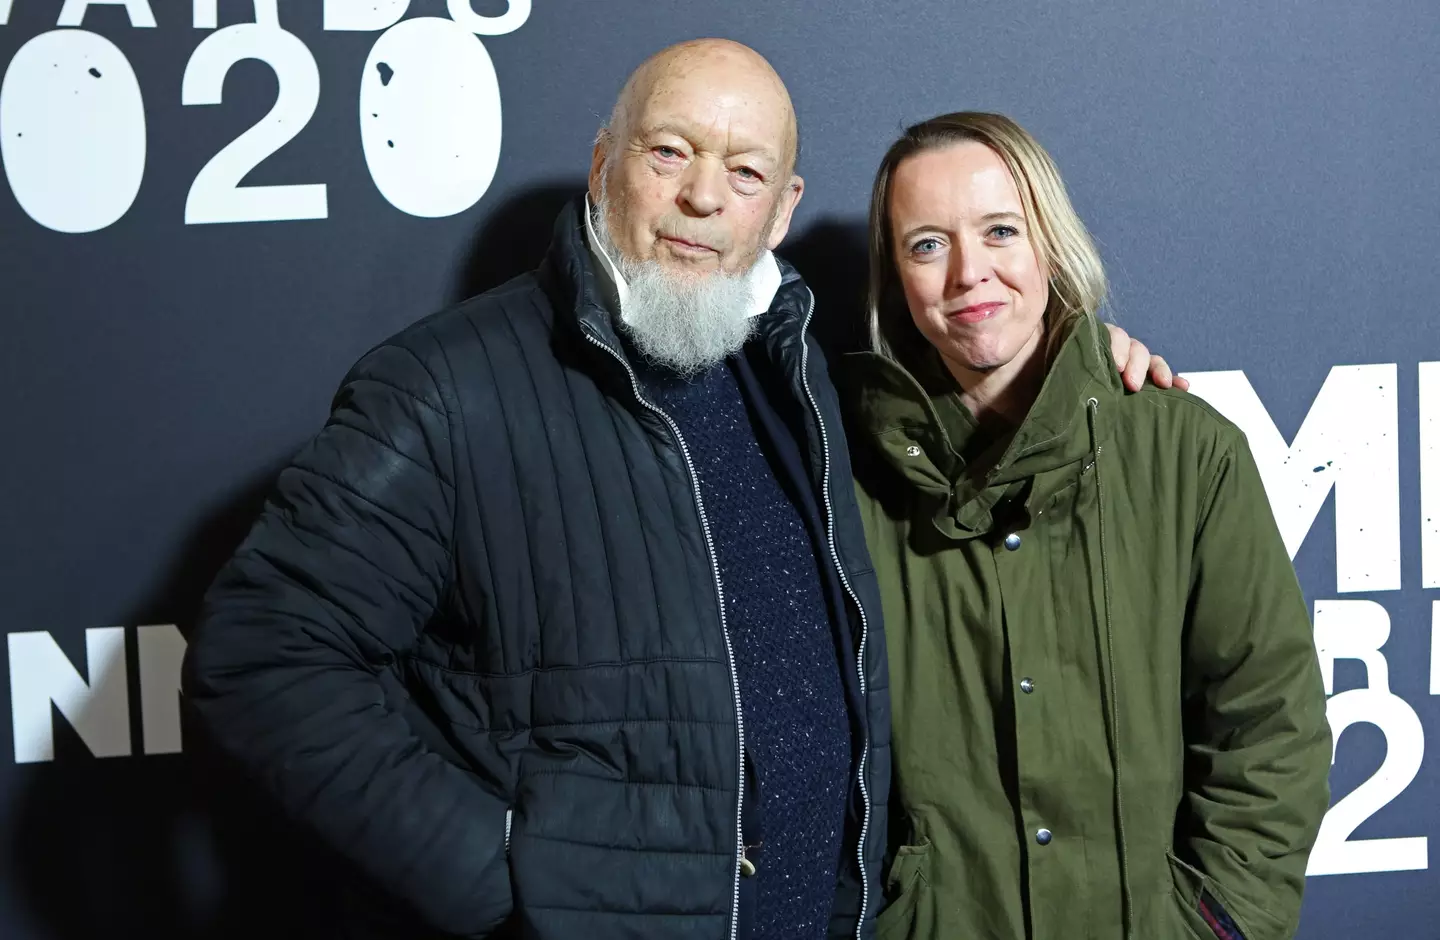 Emily has organised Glastonbury festival with her dad, Michael Eavis, for years.